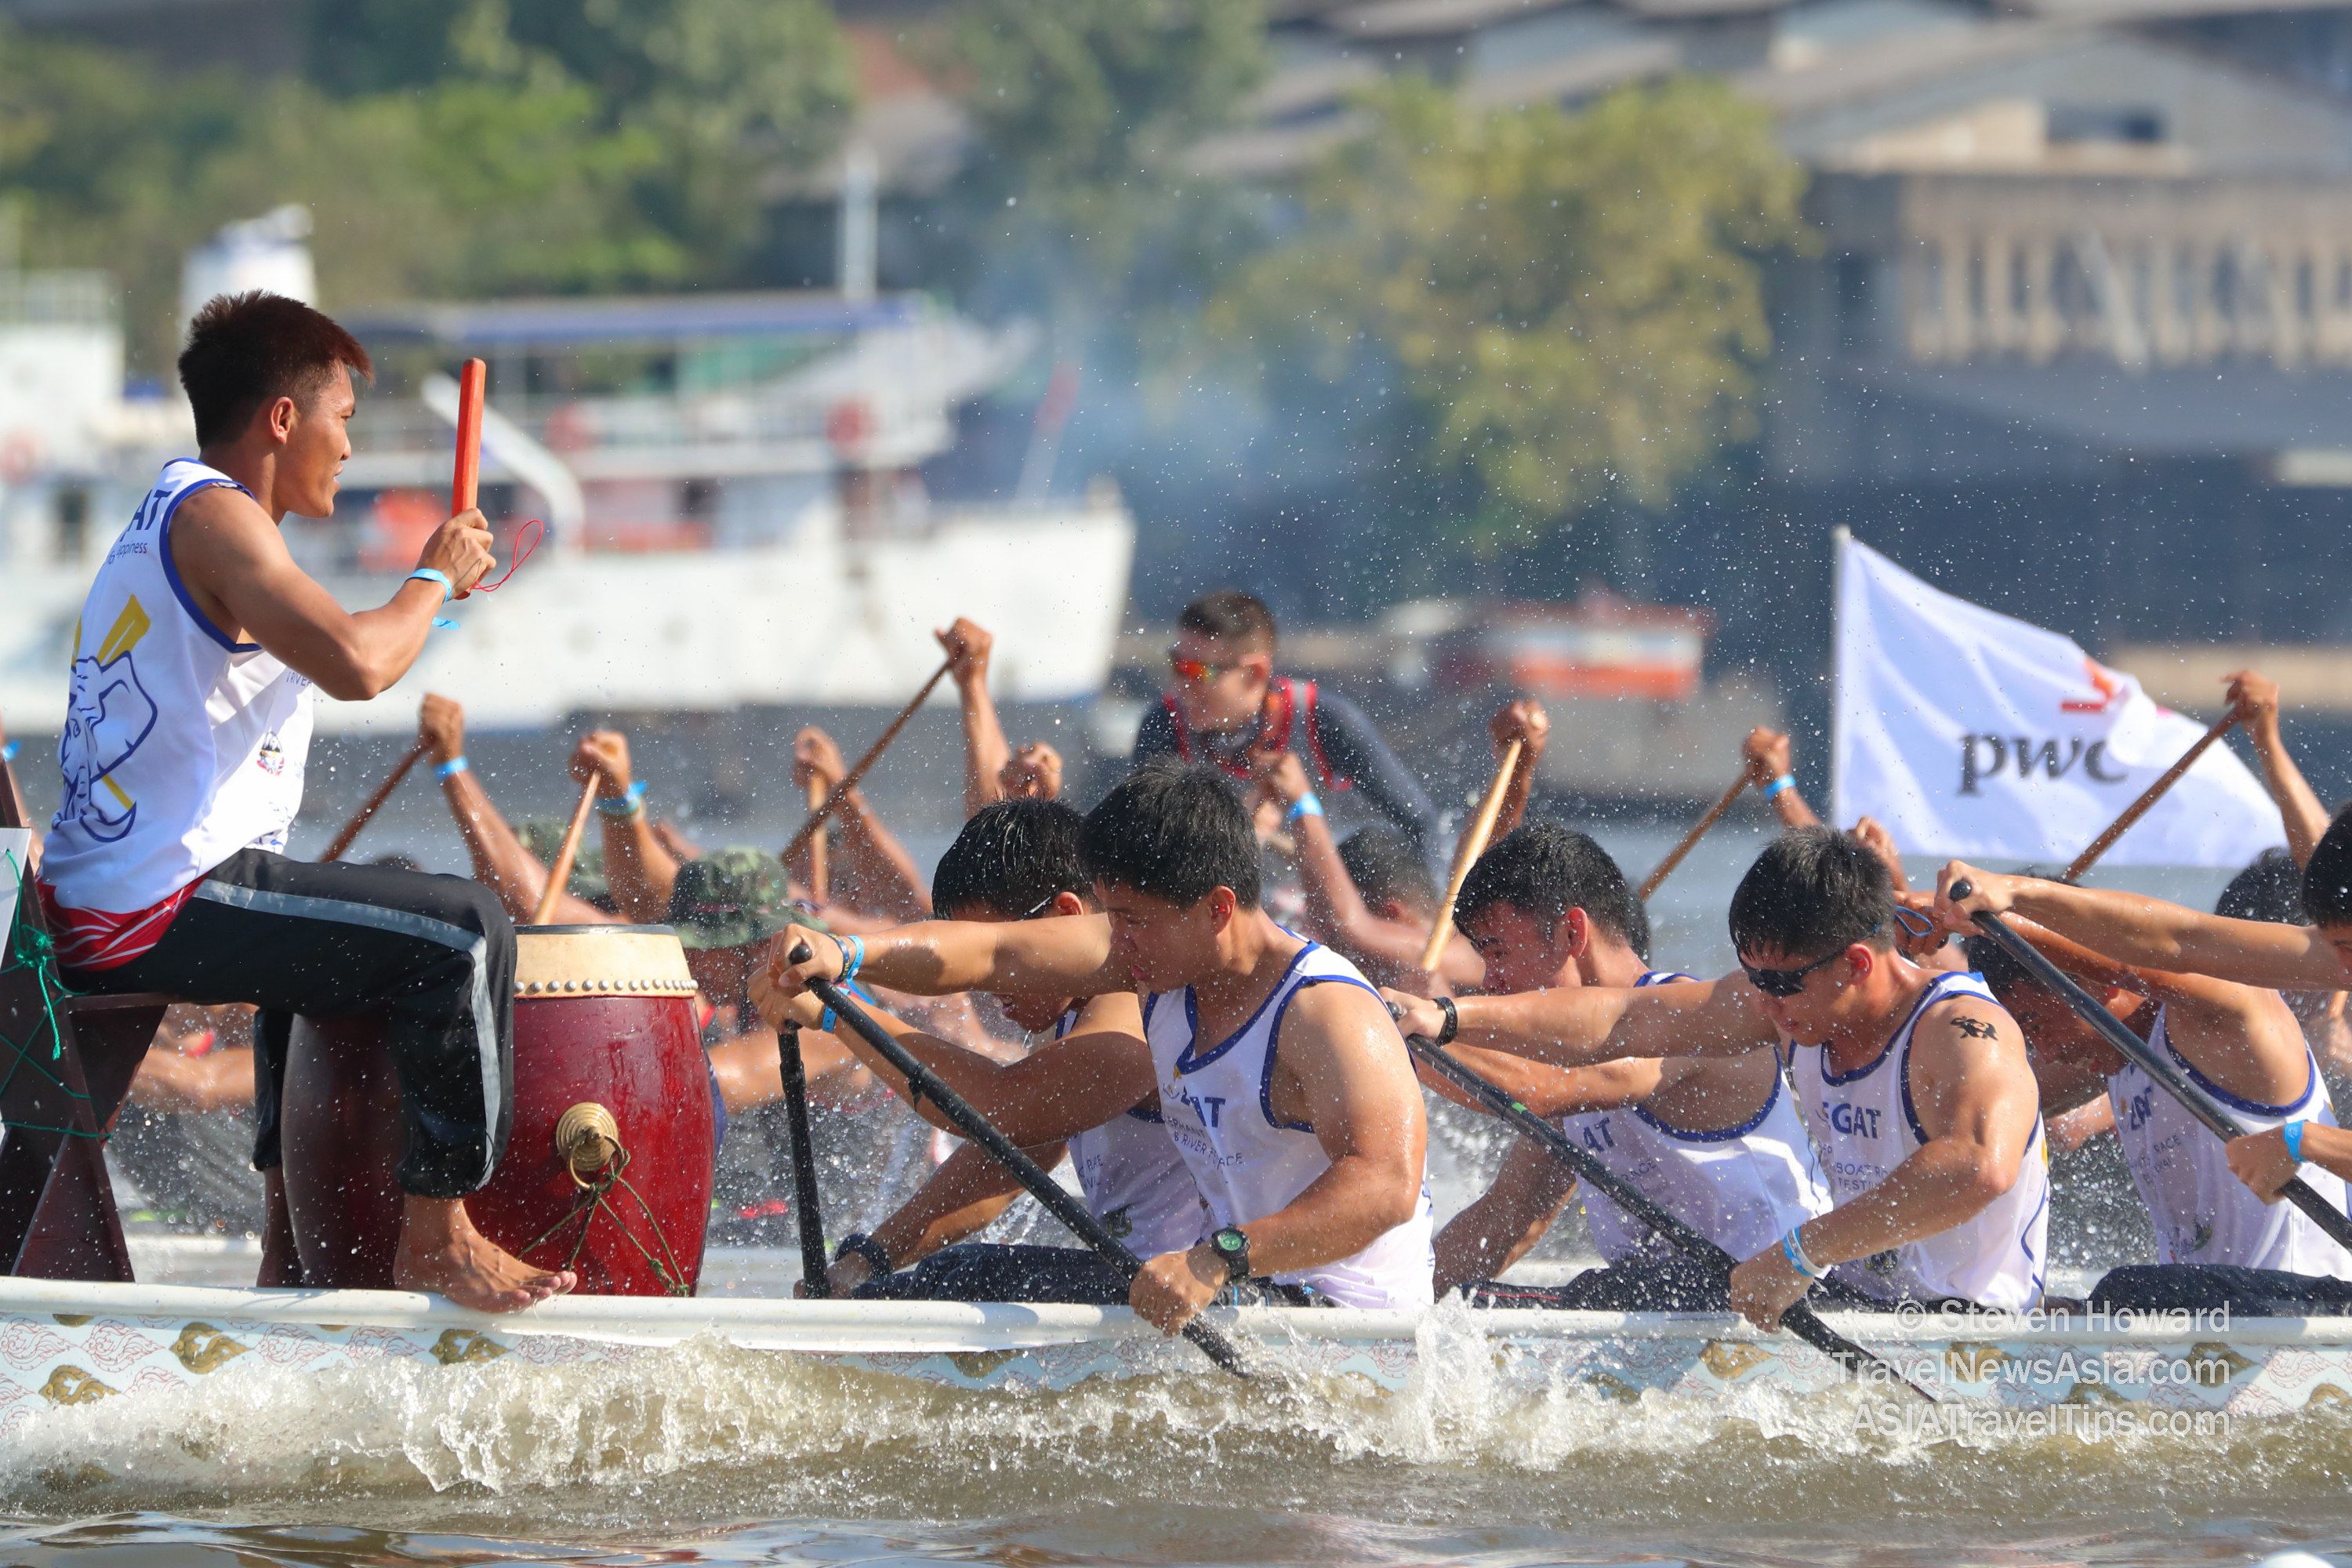 Pictures of Kings' Cup Bangkok Elephant Boat Race & River Festival 2019